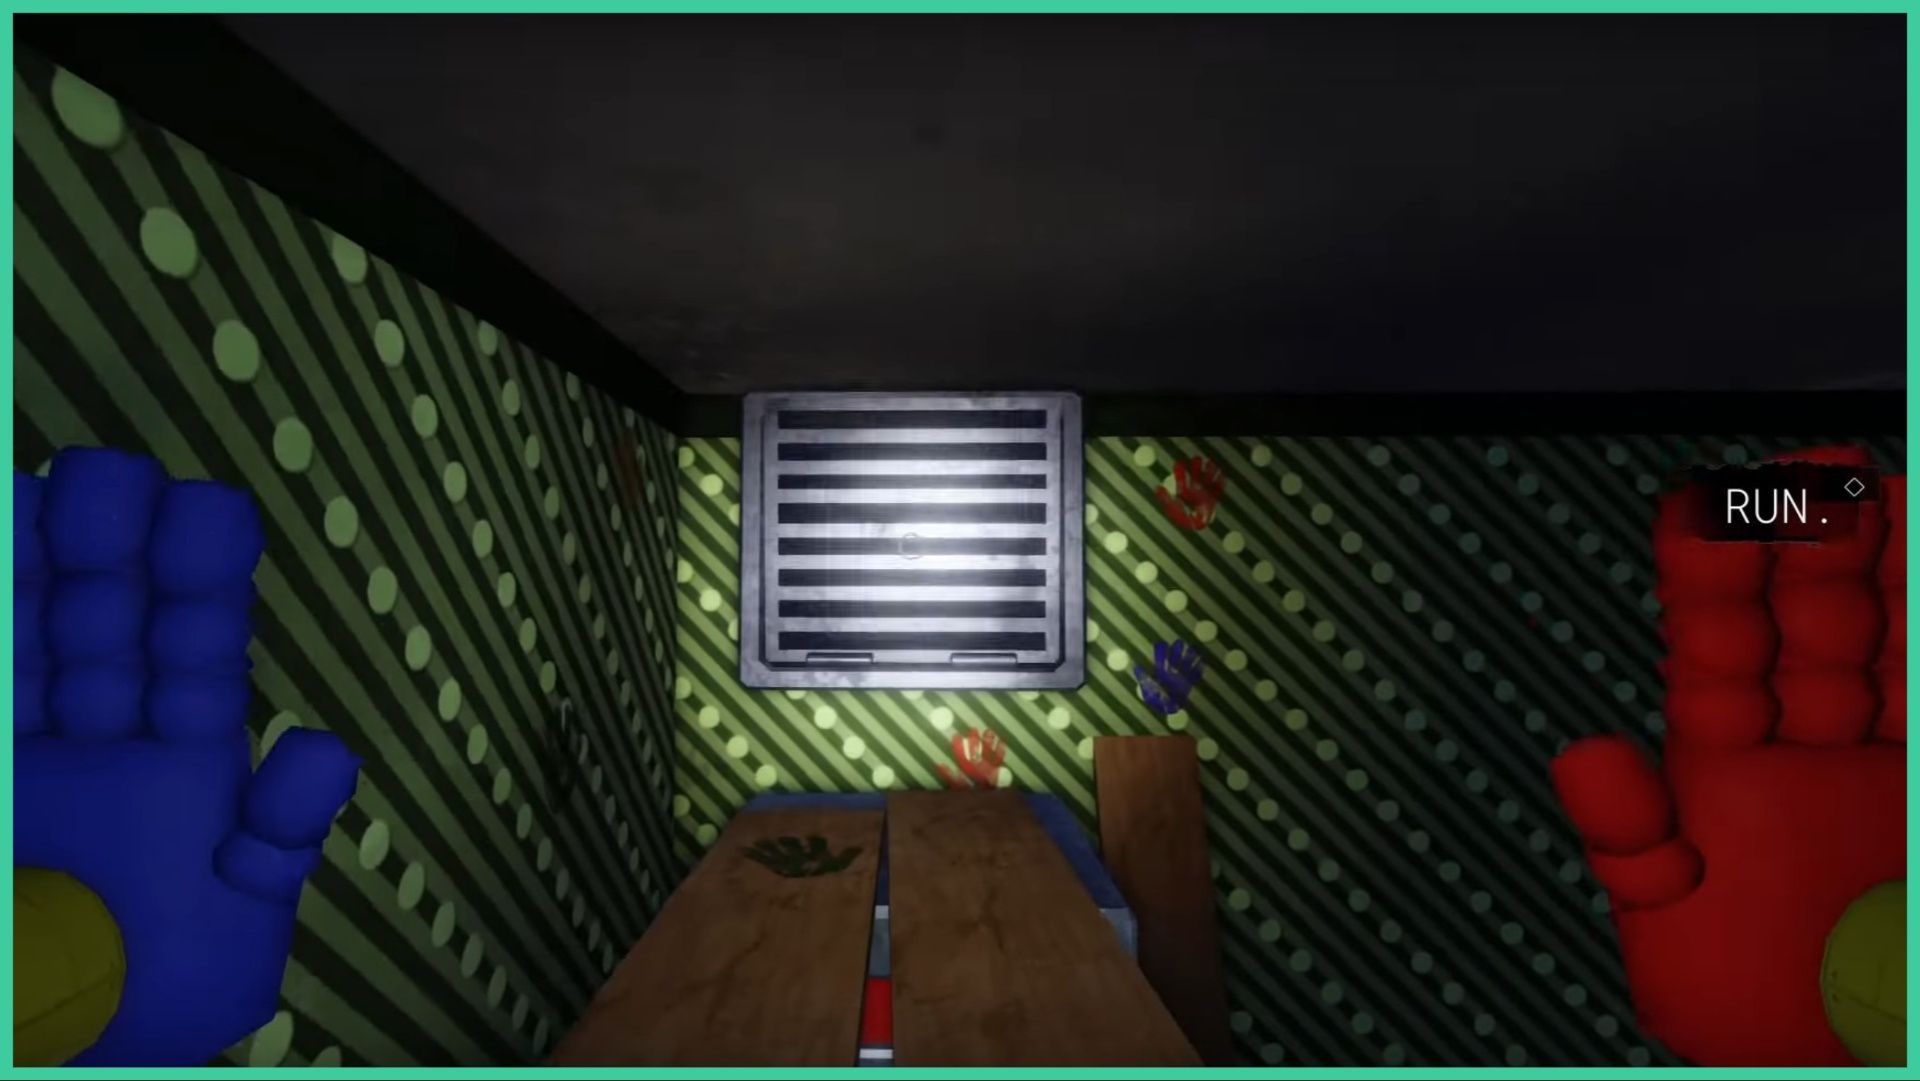 feature image for our poppy playtime forever codes guide, the image is a screenshot from the games trailer, of the player's plastic hands facing forward palms outwards, as they look at a closed vent on the wall, they are crawling on a wooden plank close to the ceiling, and there are painted handprints on the walls and wood, there is an instruction to the right of the screen that says 'run'